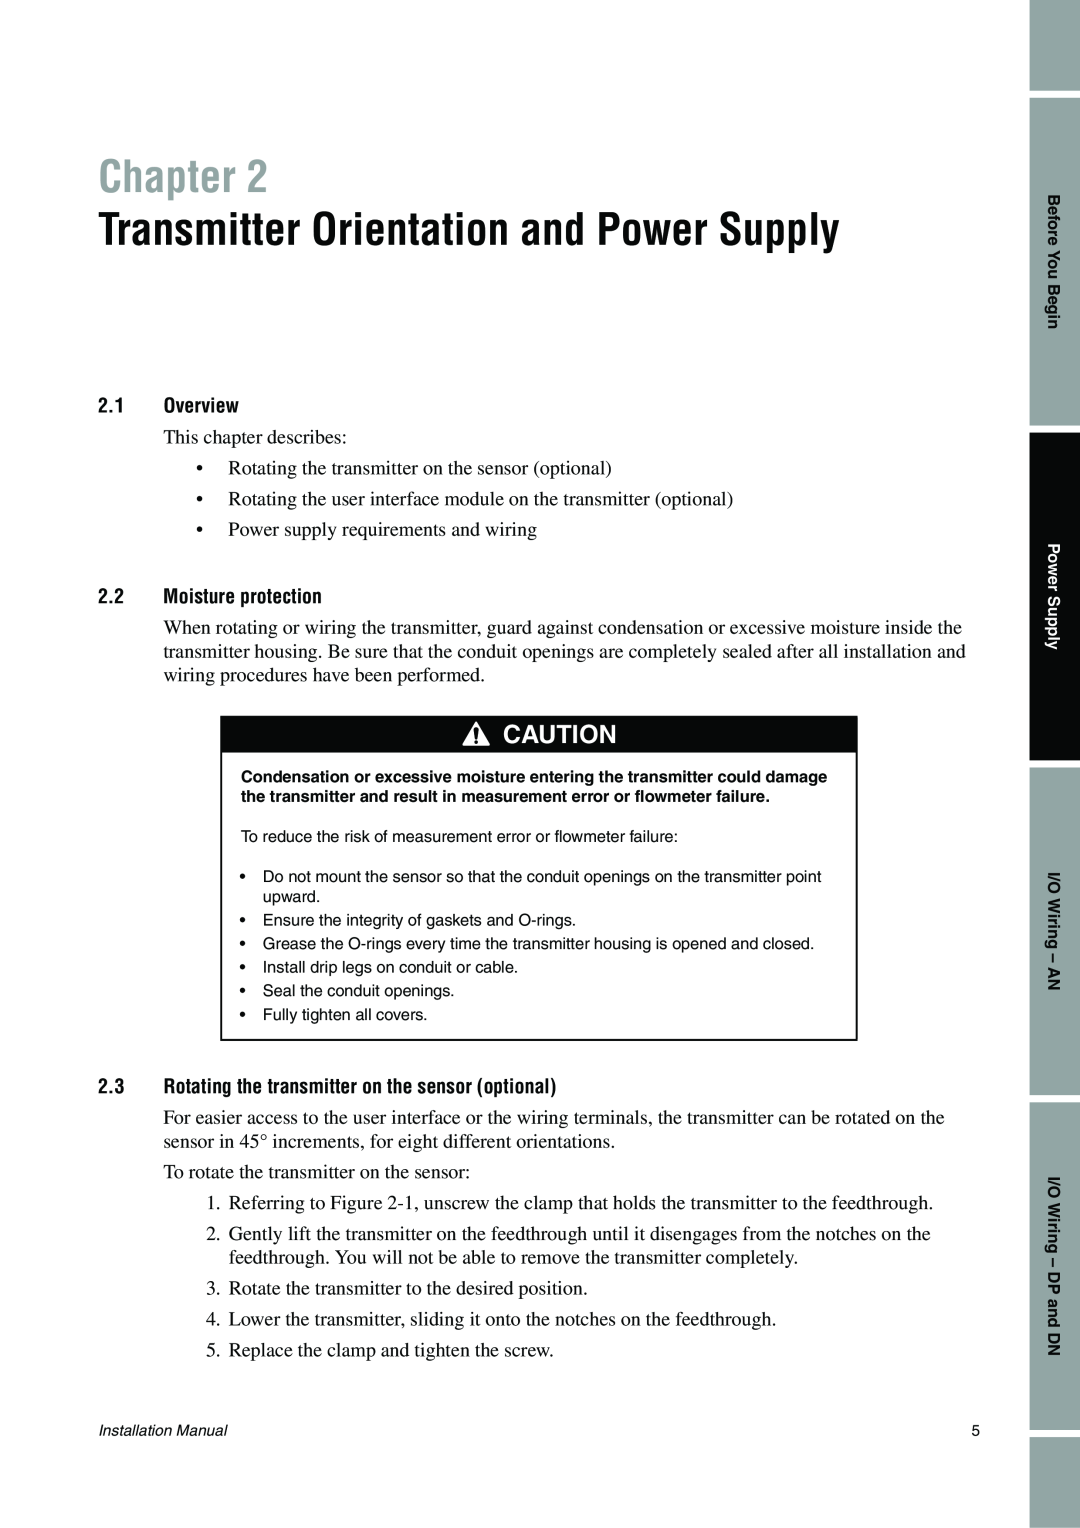 Emerson 2400S installation manual Transmitter Orientation and Power Supply, Chapter, 2.1Overview, 2.2Moisture protection 